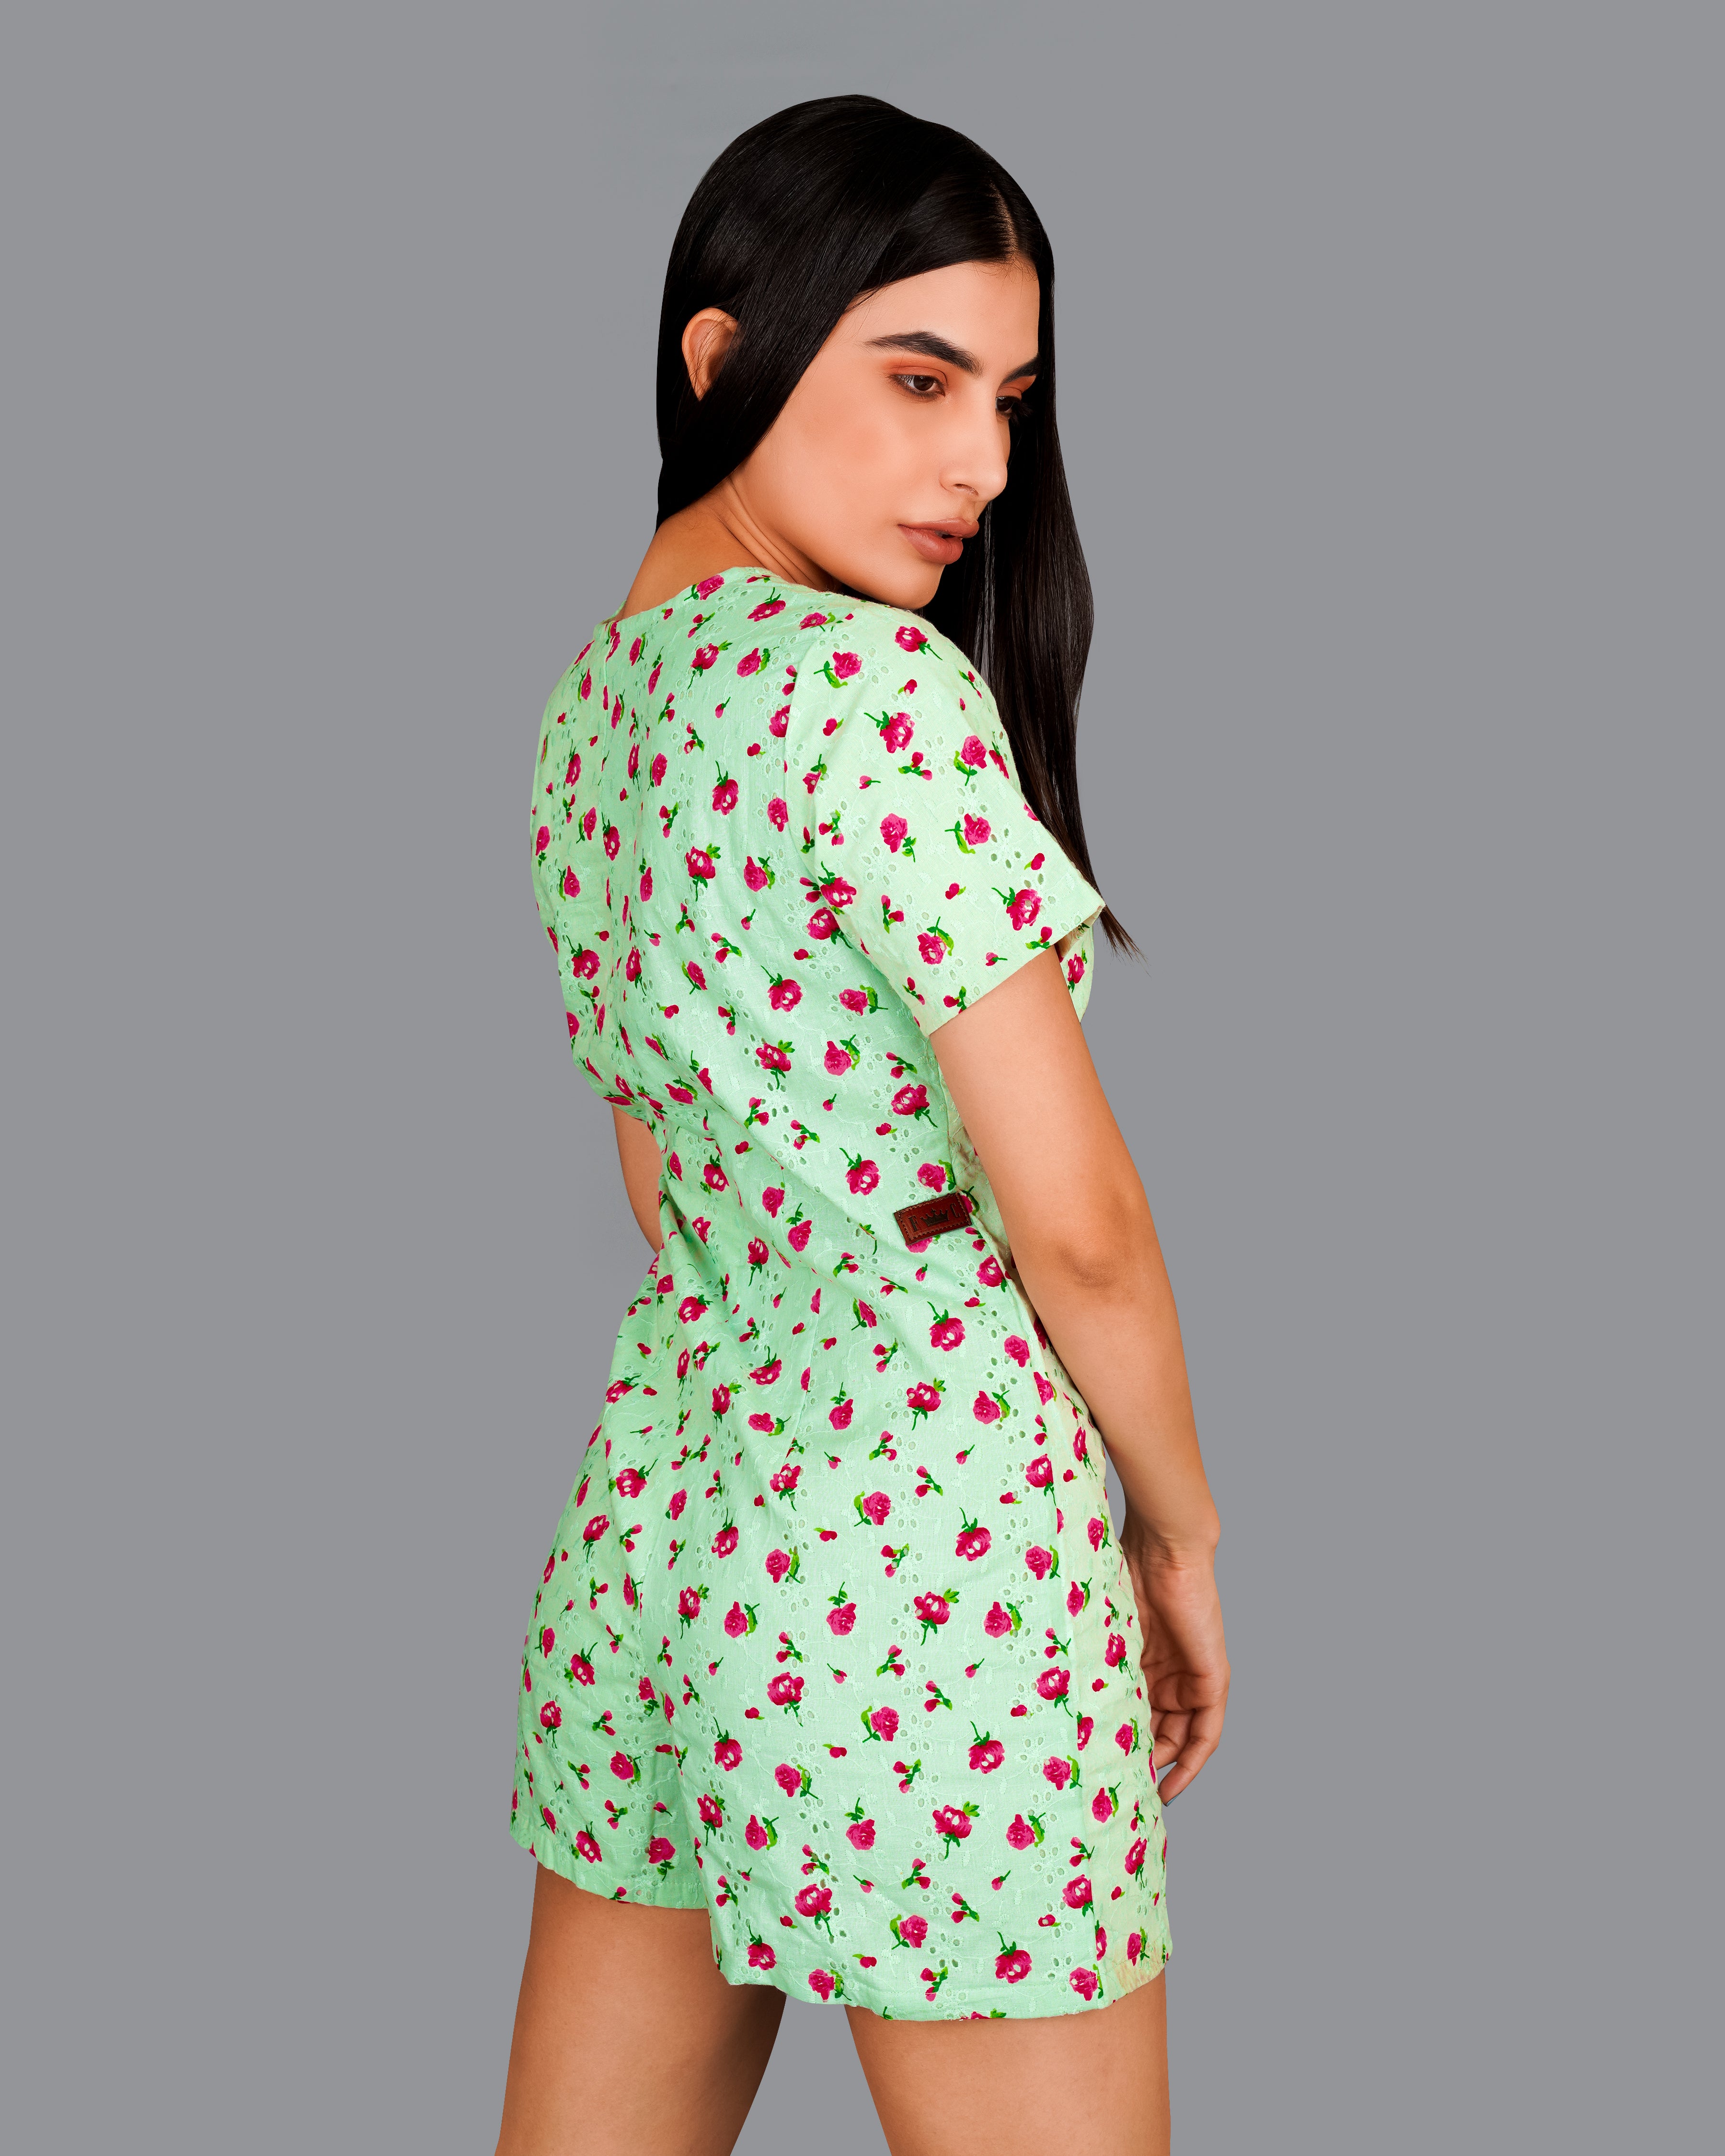 Celadon Green Rose Printed Premium Cotton Jumpsuit WD008-32, WD008-34, WD008-36, WD008-38, WD008-40, WD008-42 